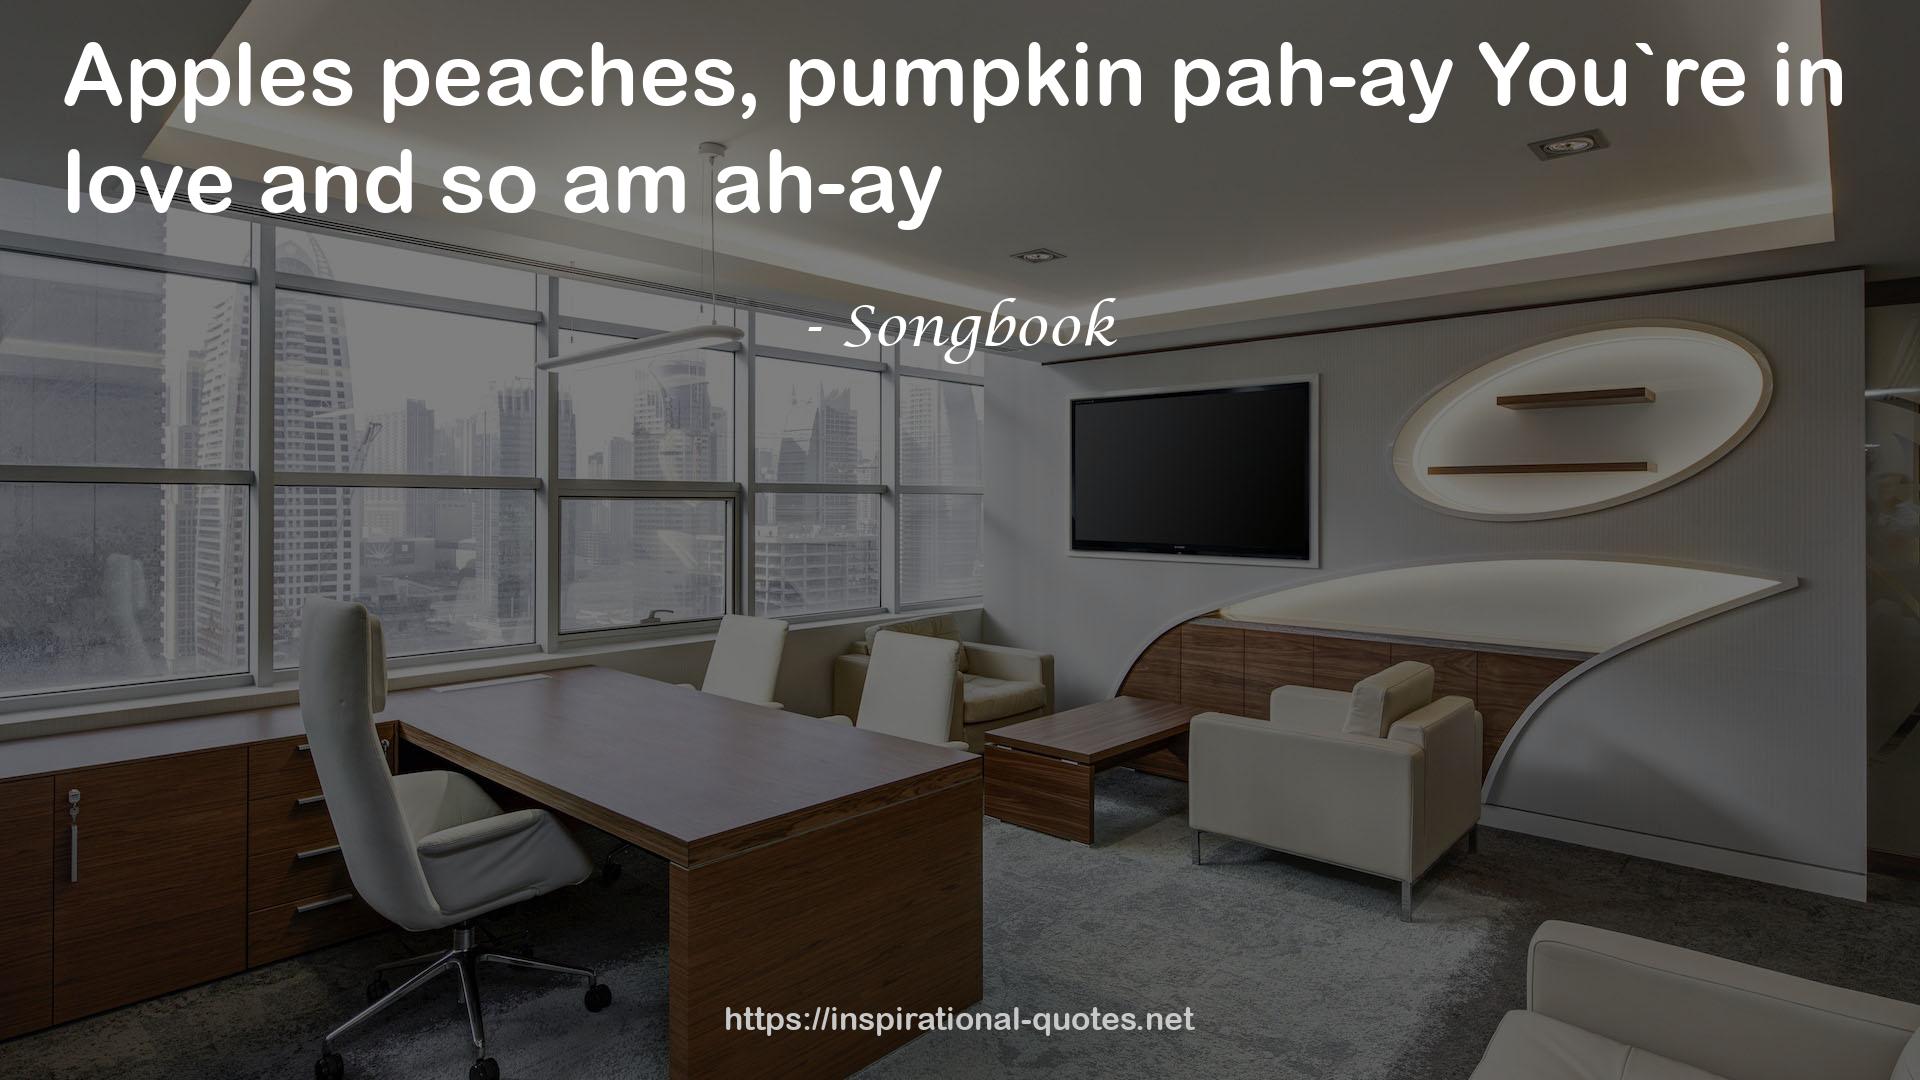 Songbook QUOTES